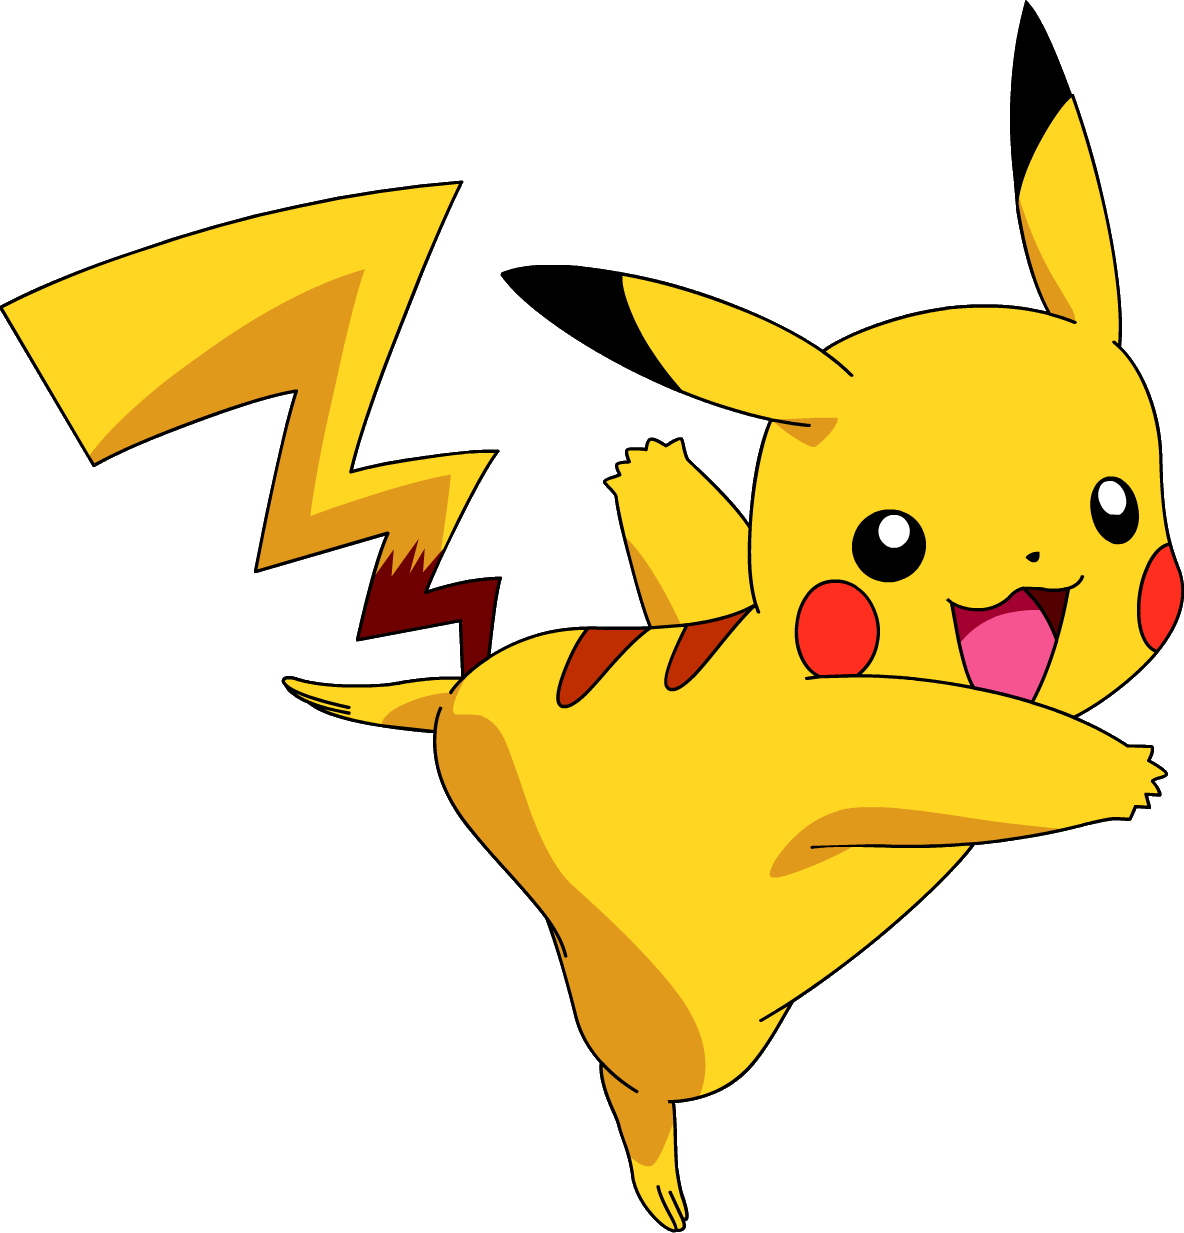 Pikachu Clipart Roblox Pikachu Roblox Transparent Free For Download On Webstockreview 2020 - 26 pikachu clipart roblox free clip art stock illustrations